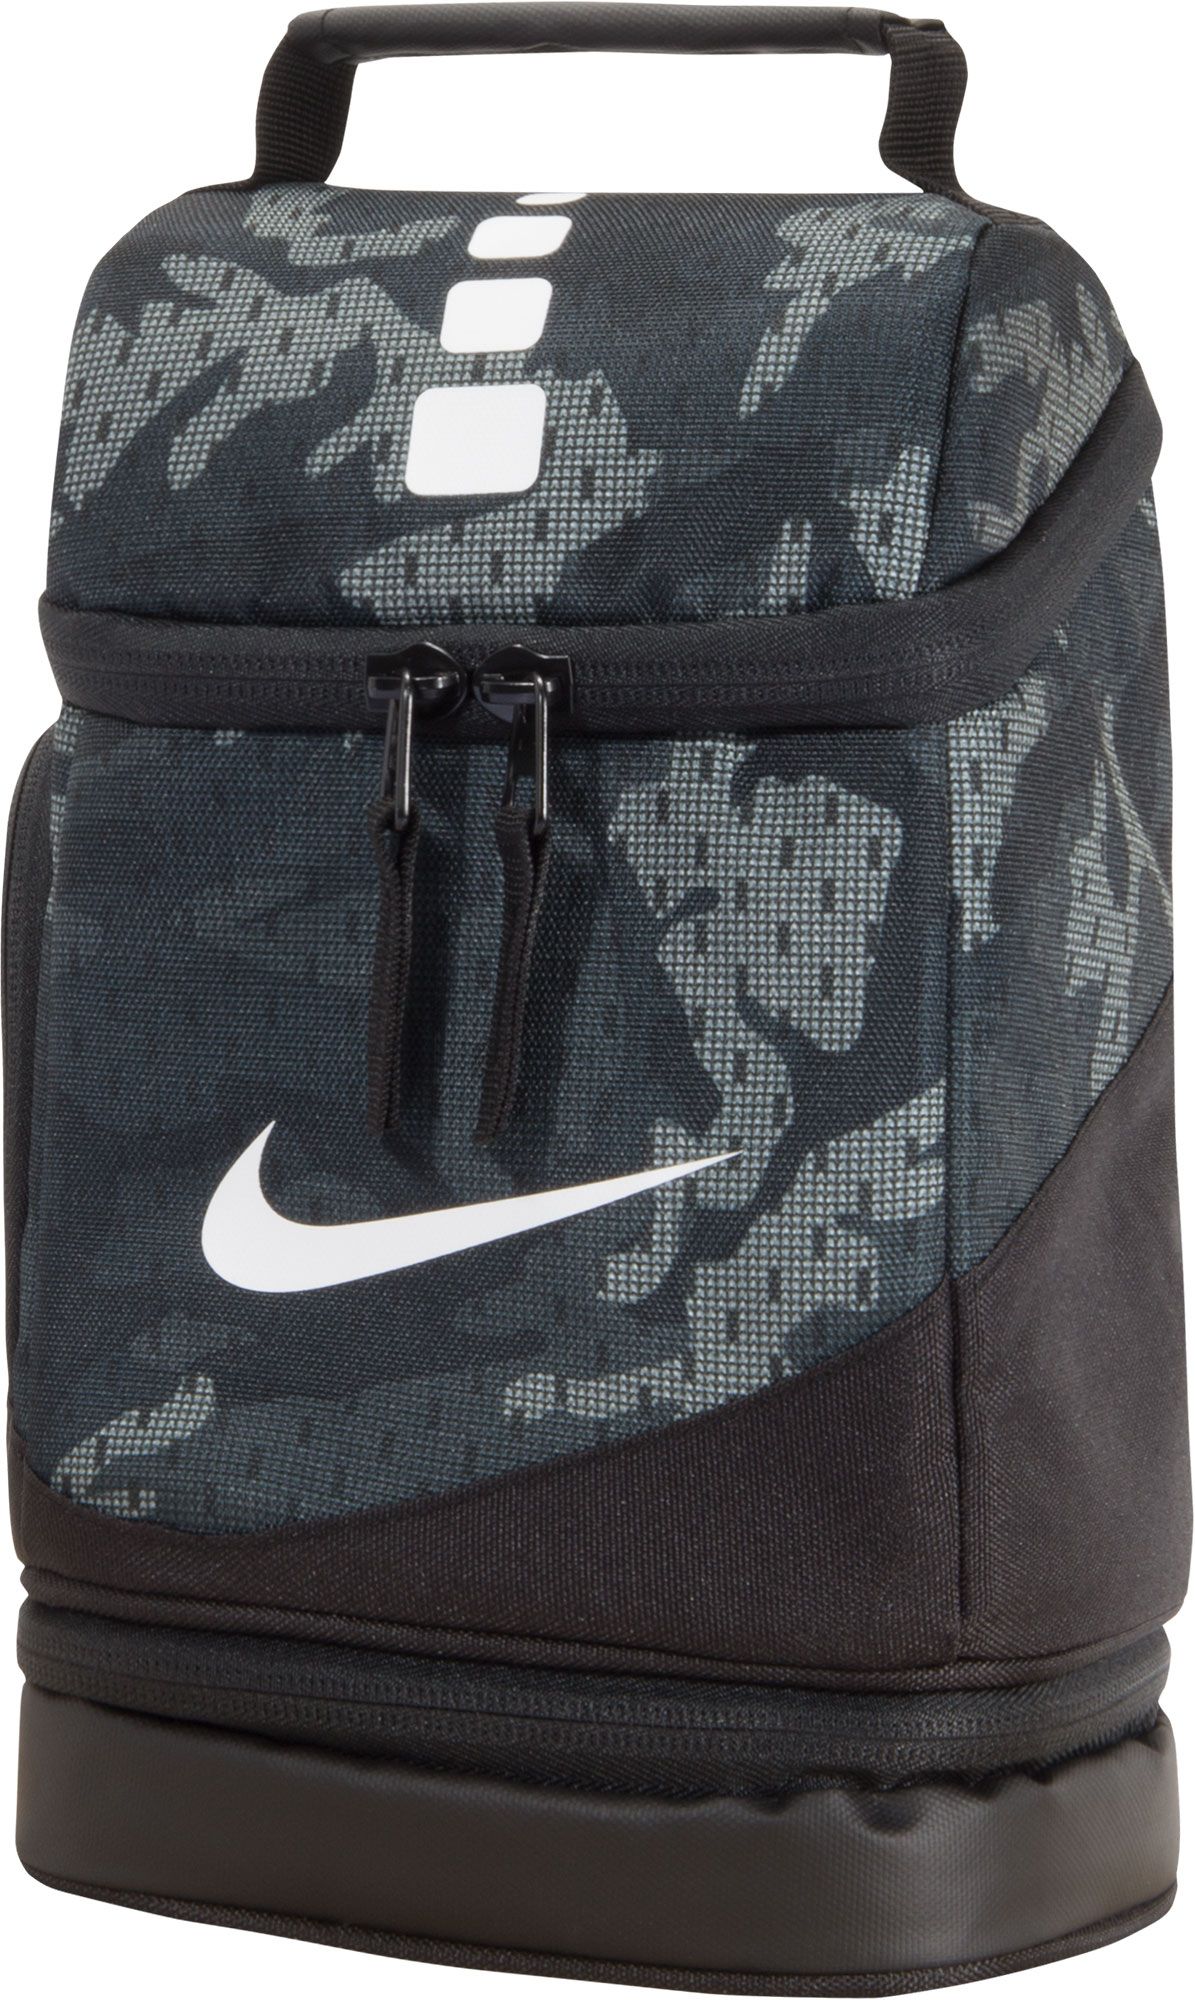 nike bookbag with lunch box